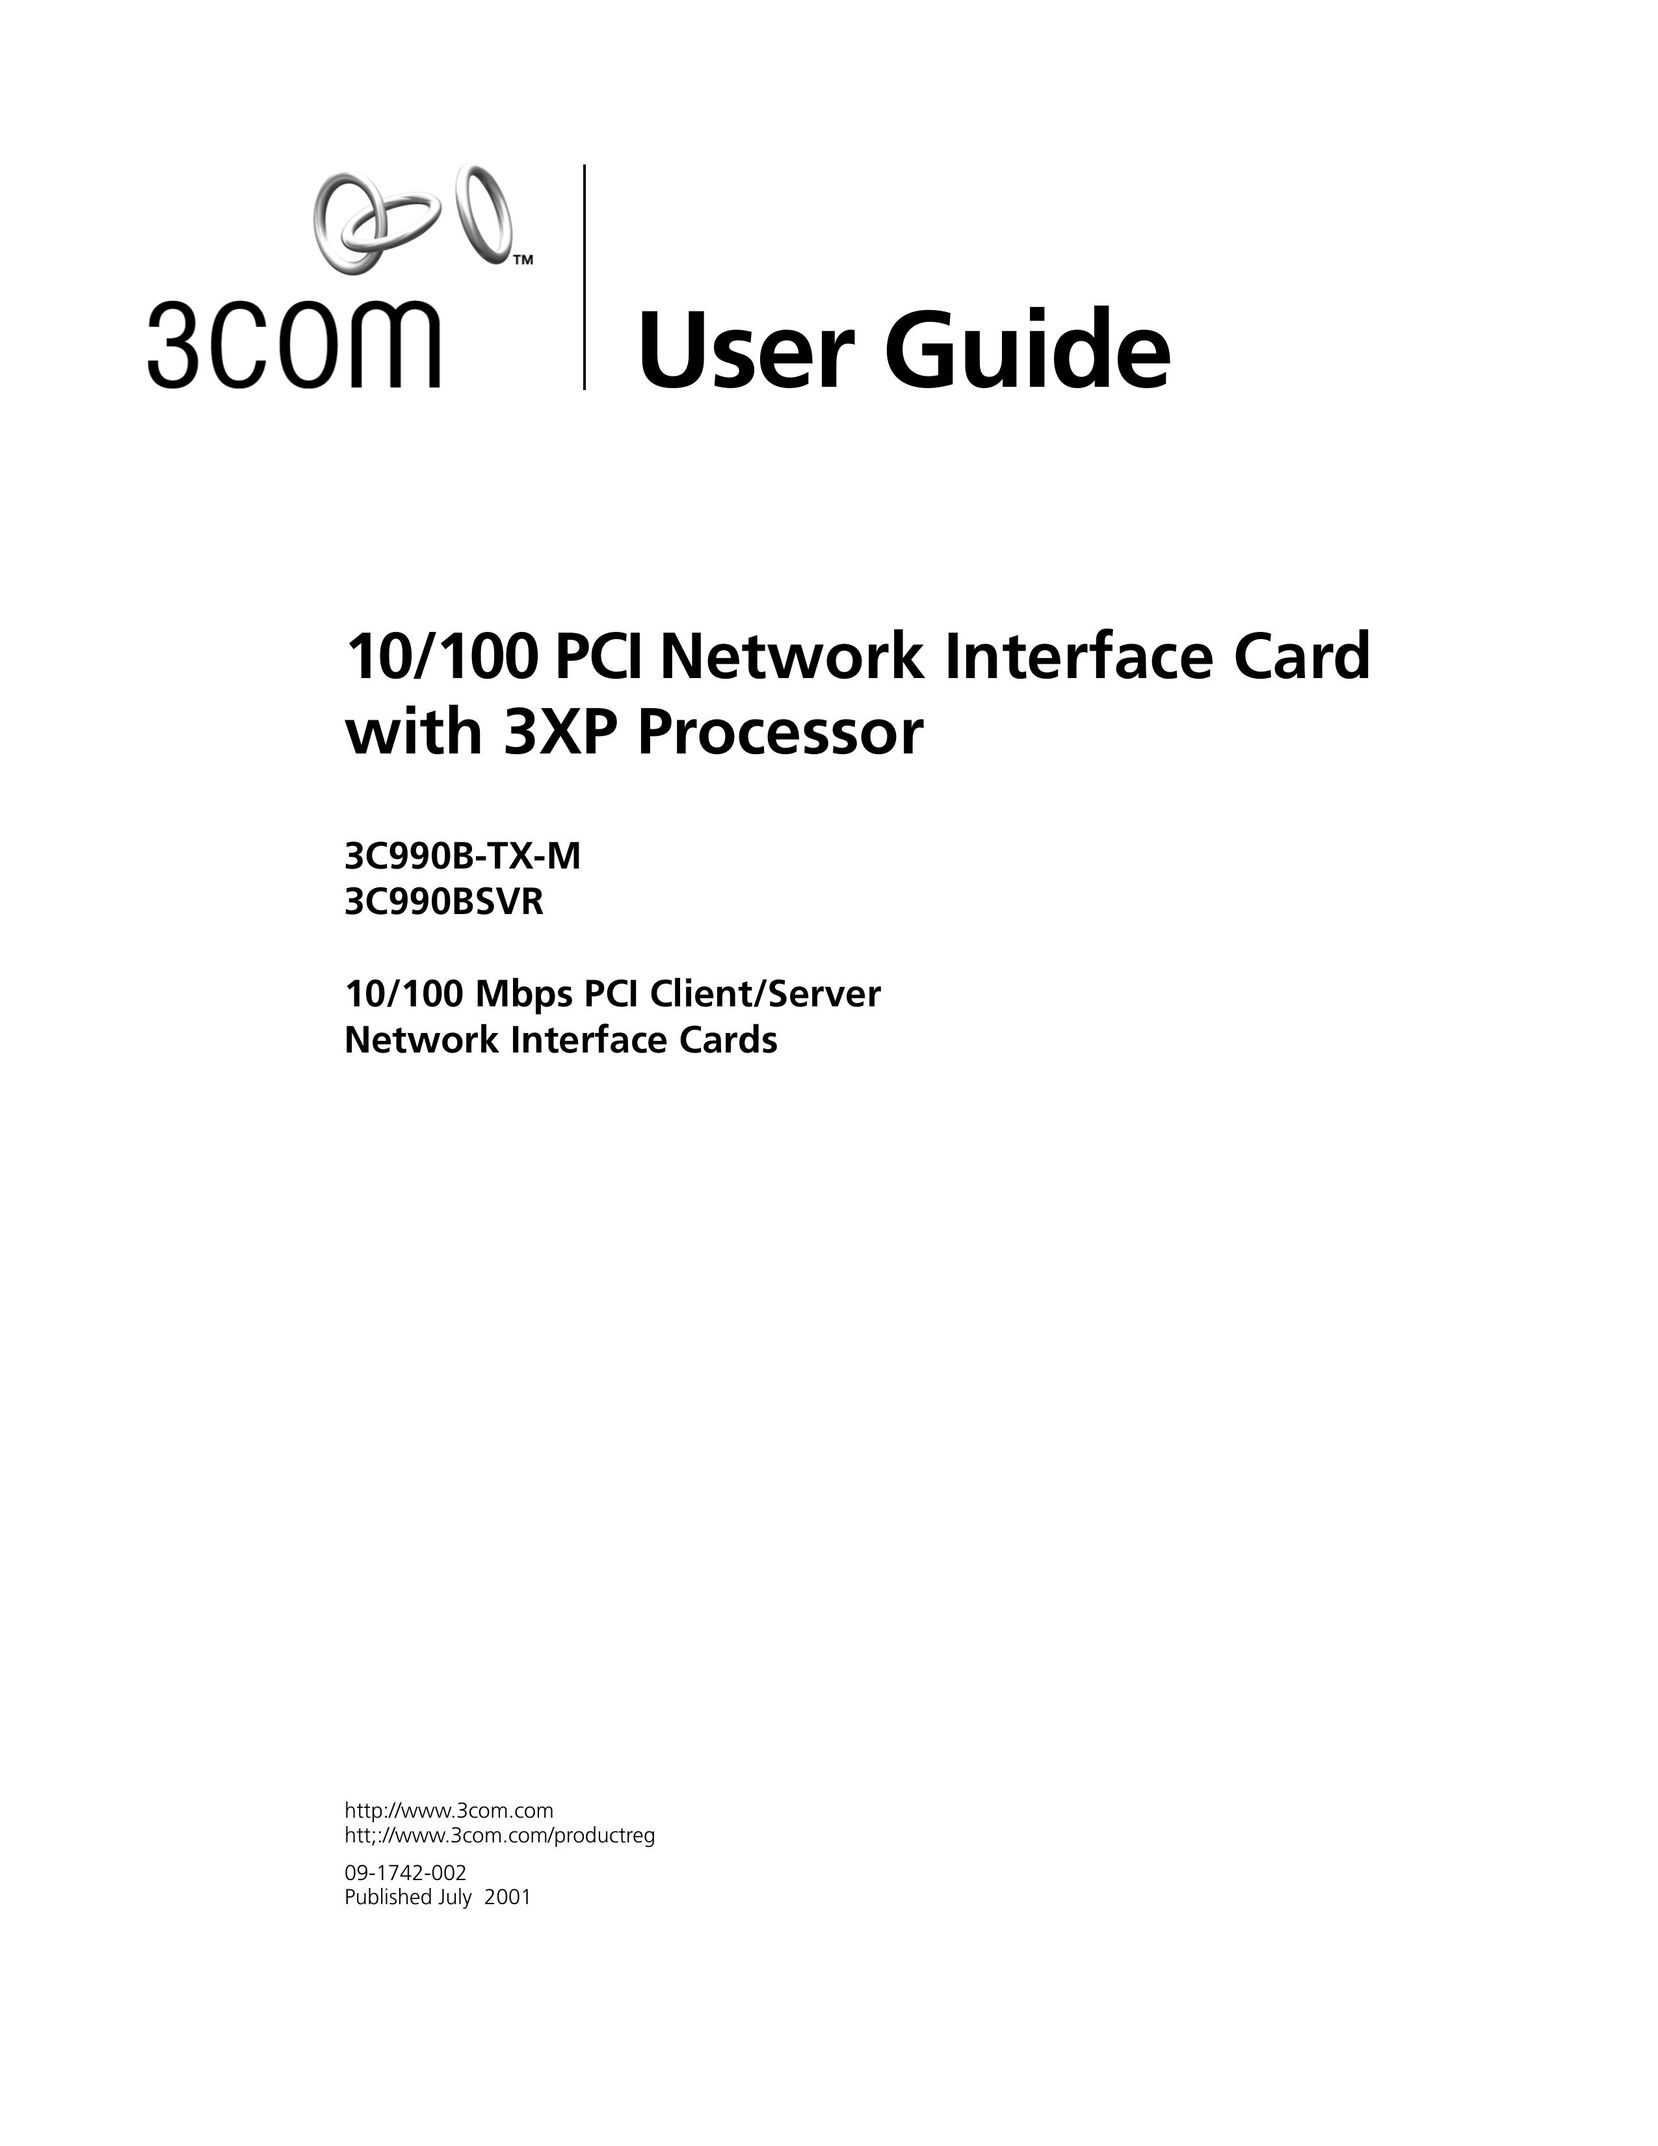 3Com 3C990BSVR Network Card User Manual (Page 1)